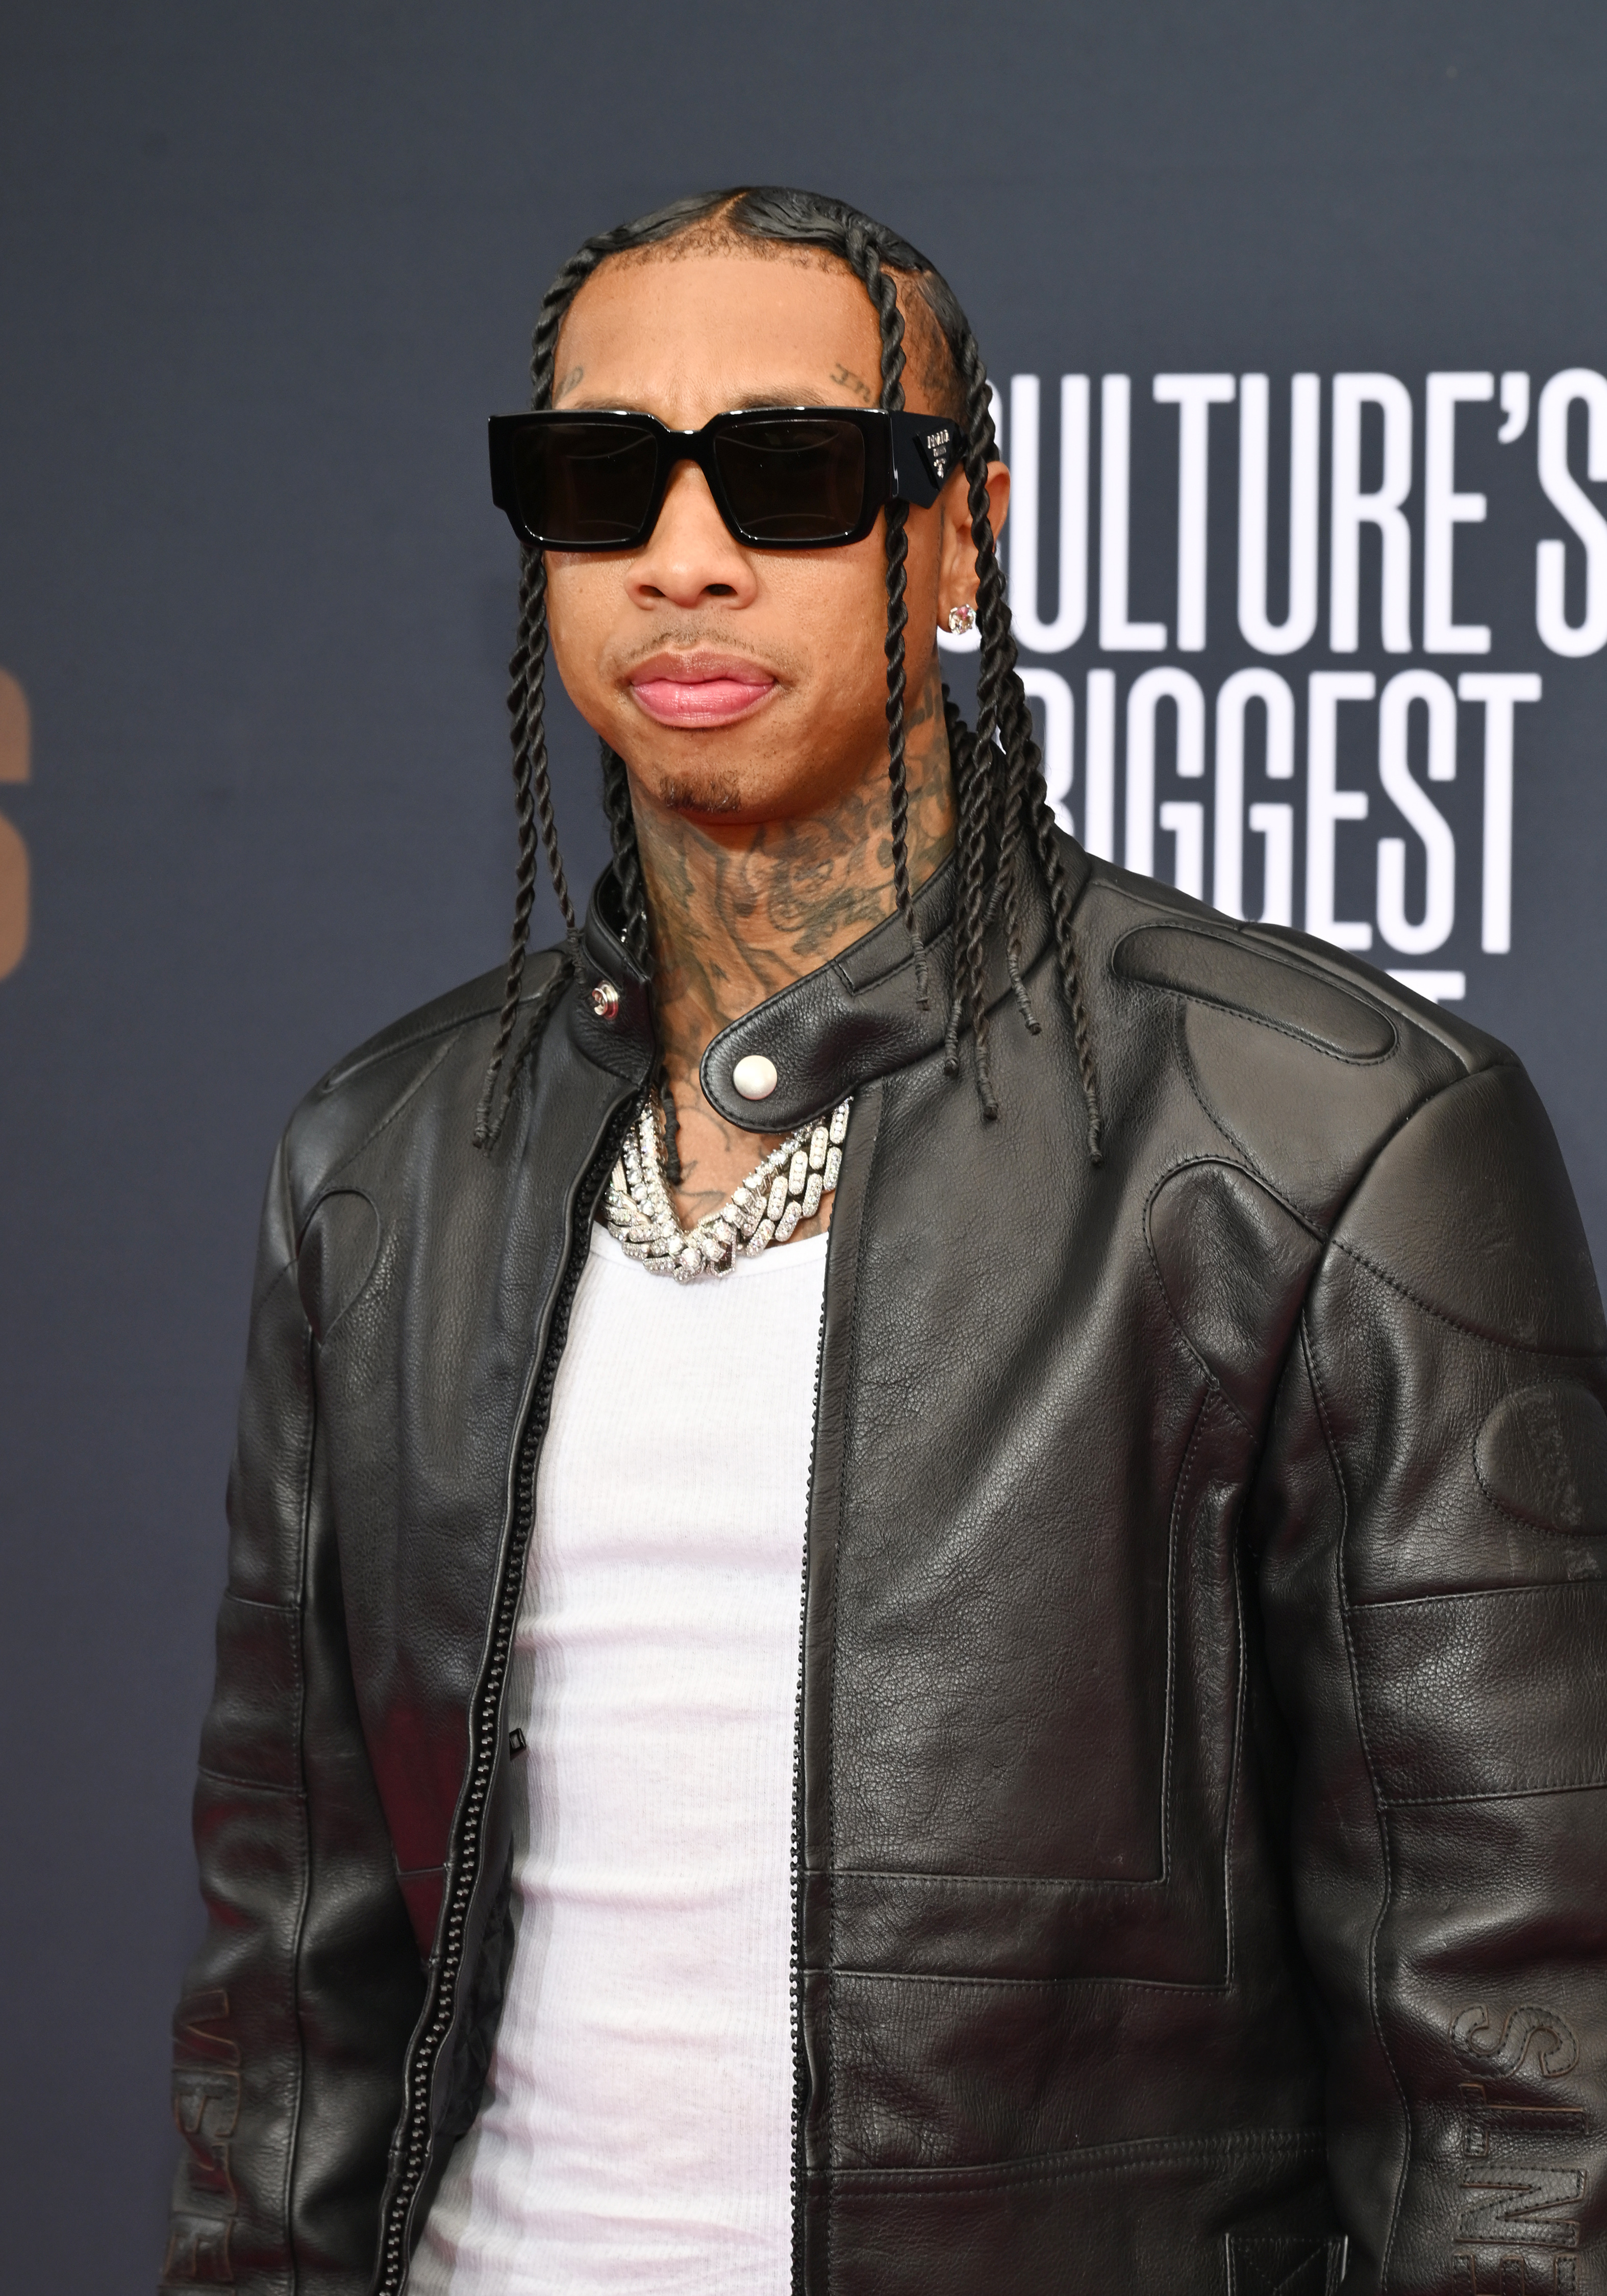 Close-up of Tyga at a media event wearing sunglasses and a leather jacket